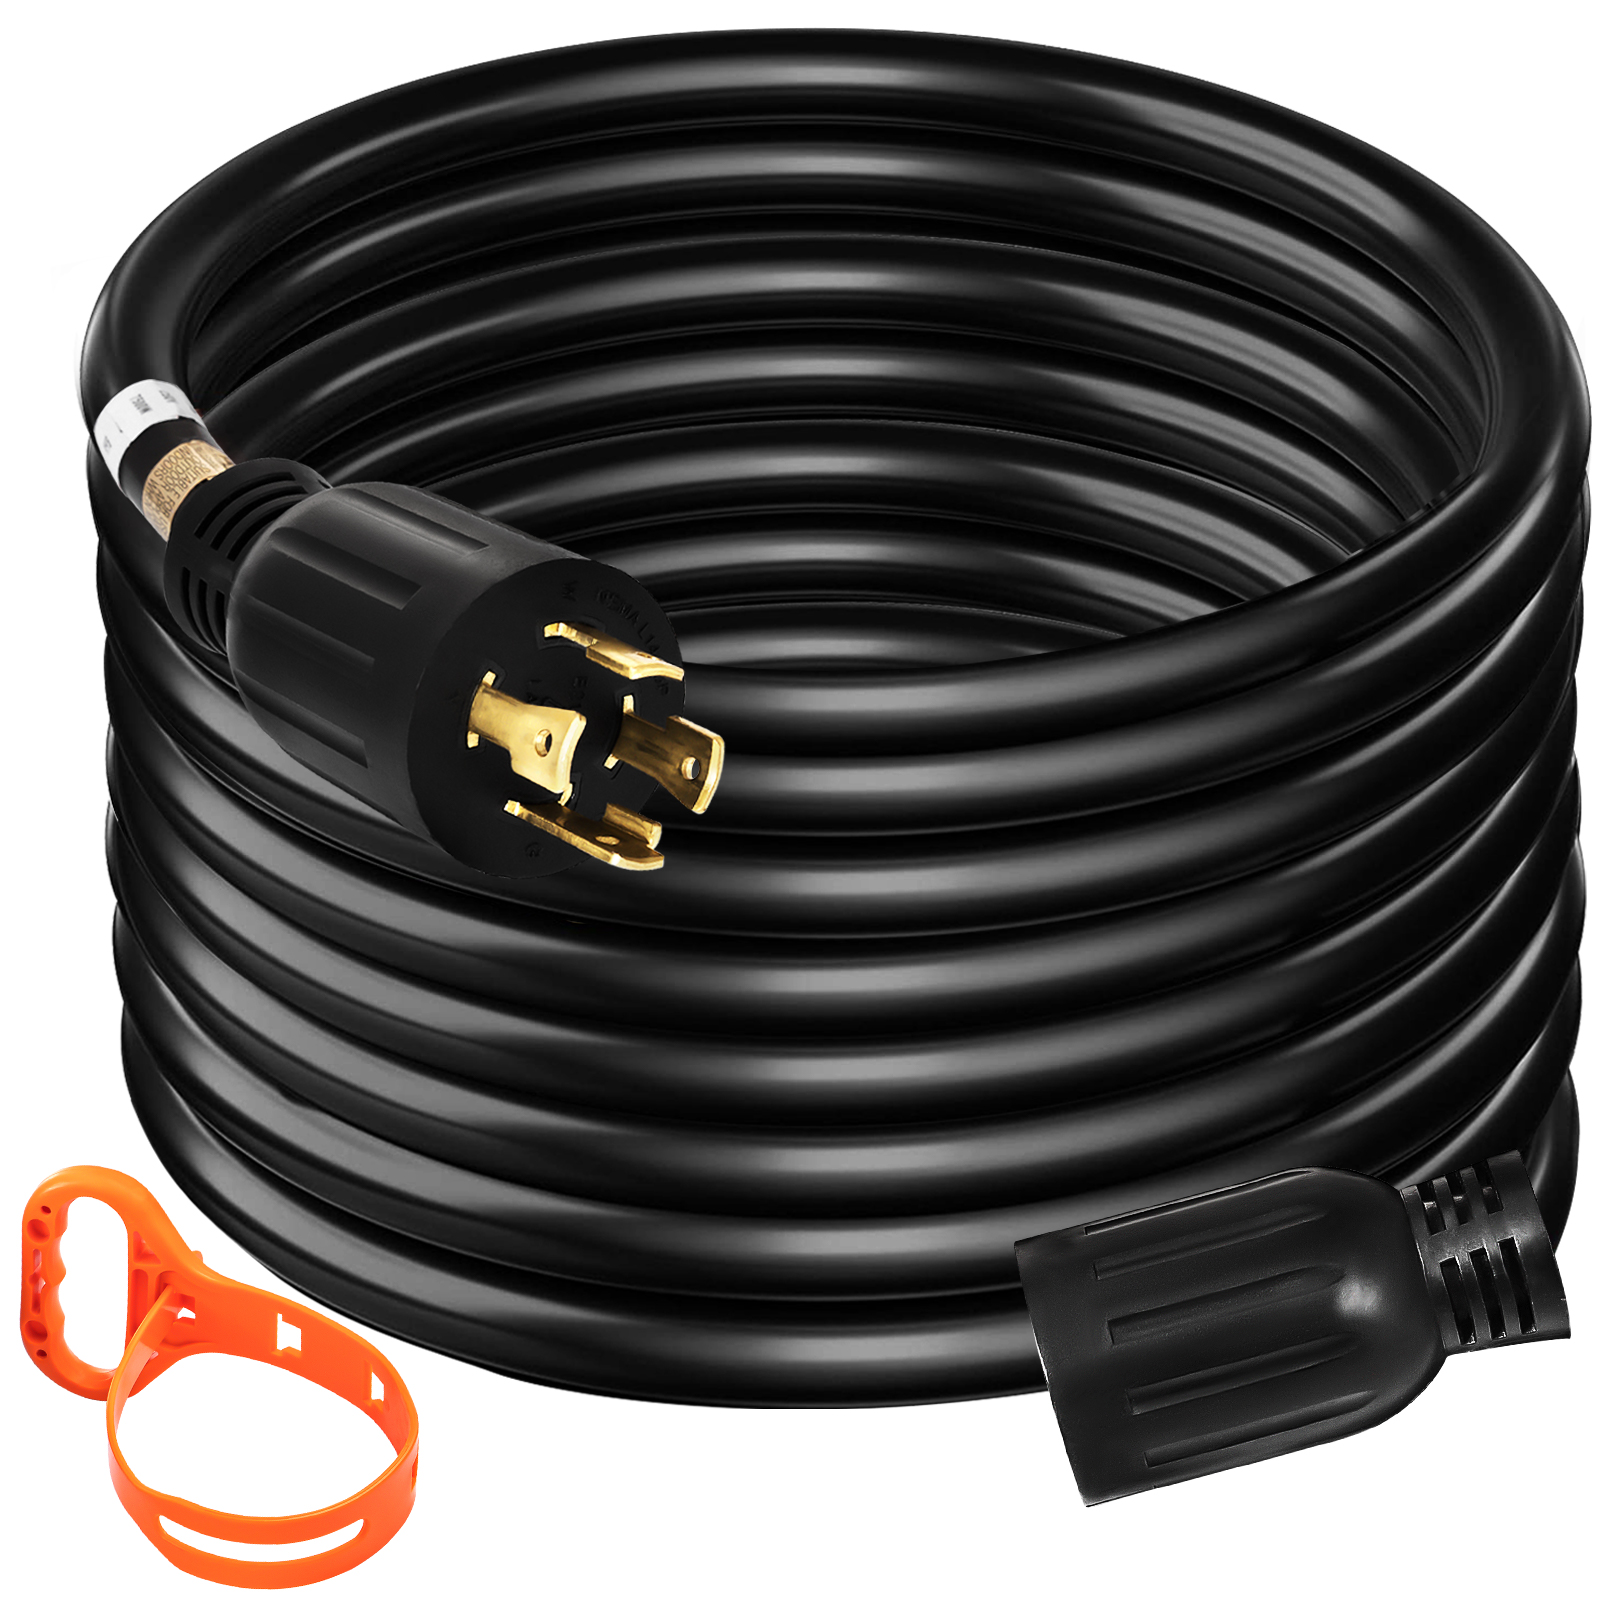 Generator Extension Cord 40' 10/4 Power Cable 30 Amp Adapter Plug Copper Wire от Vevor Many GEOs